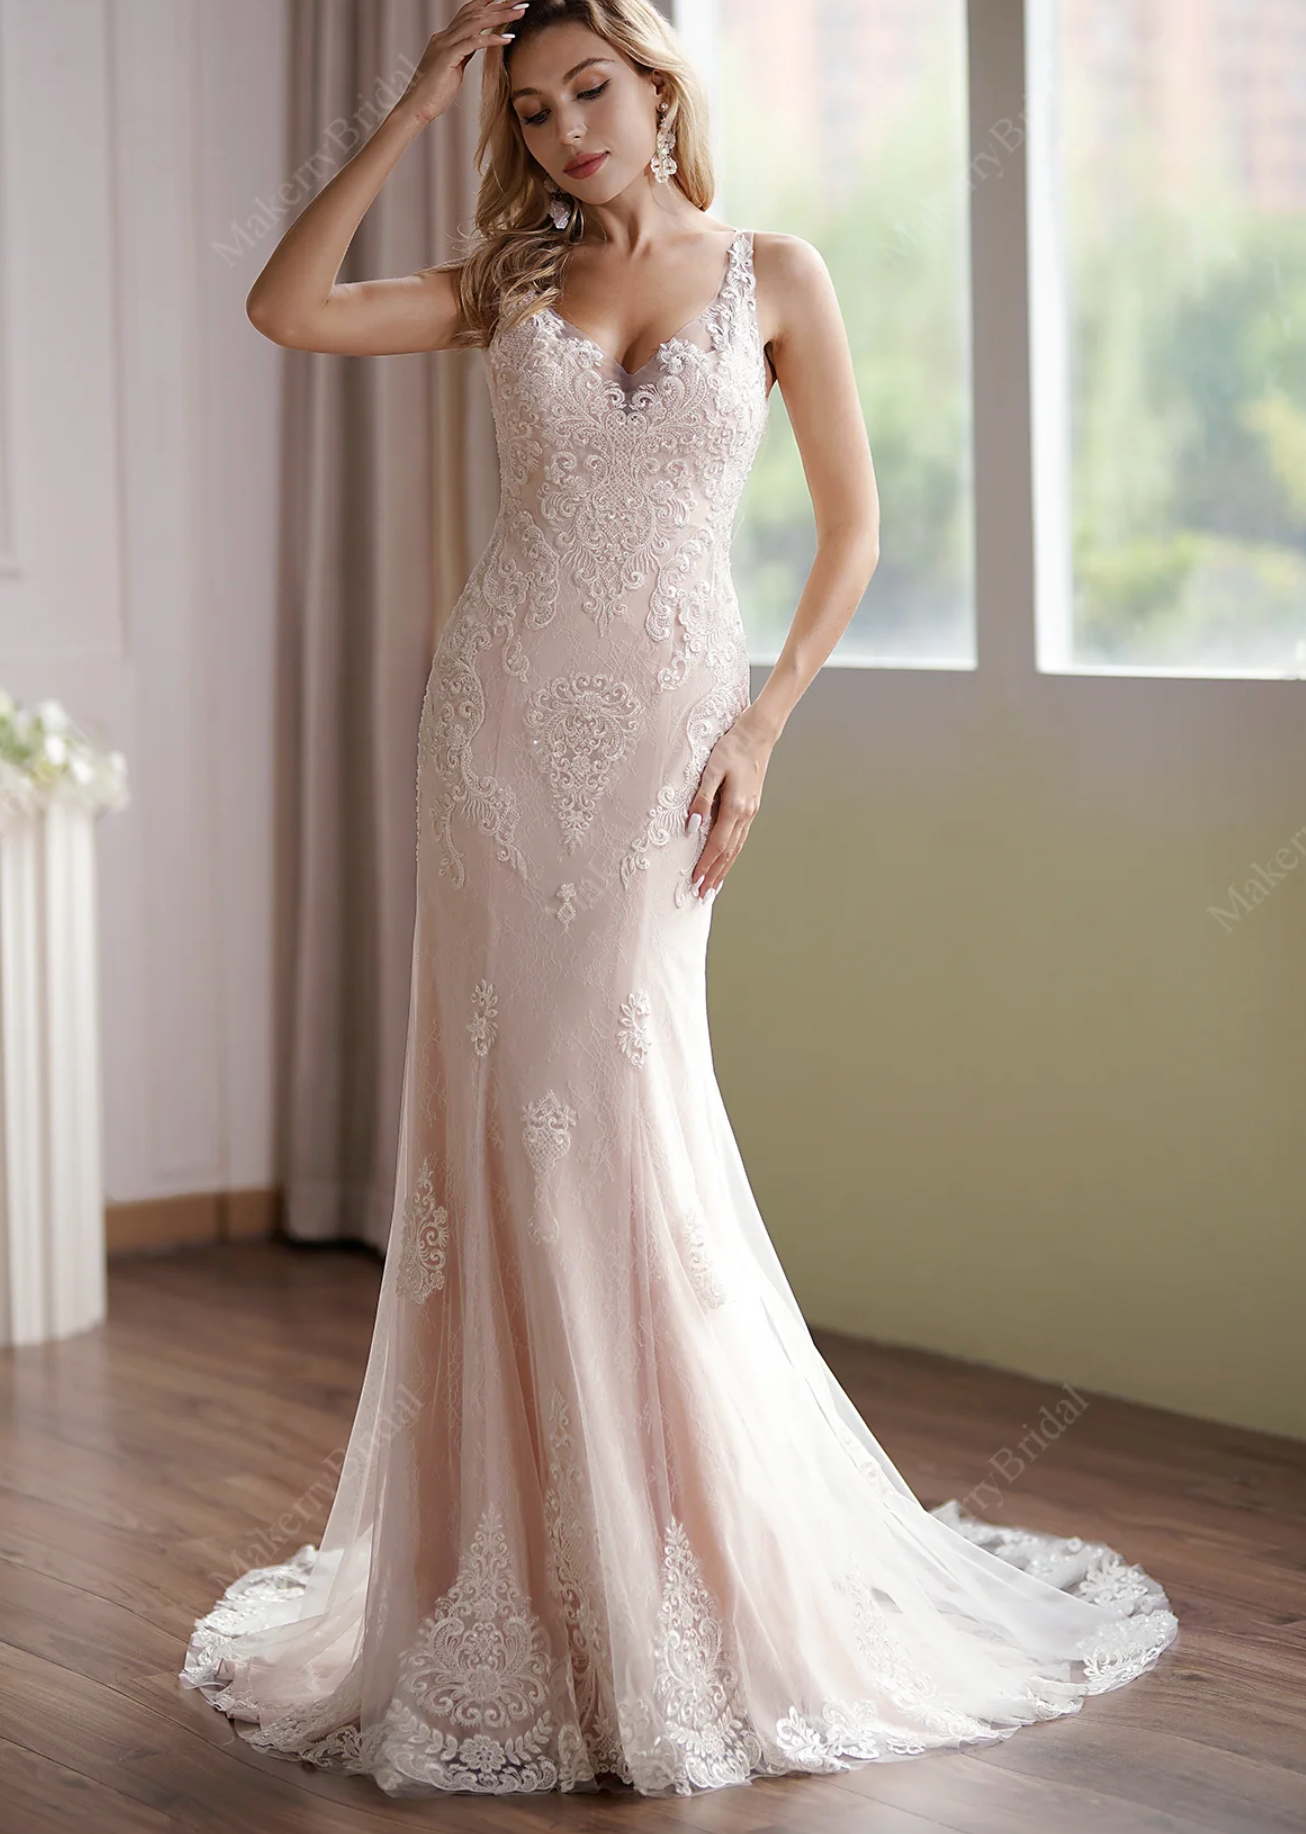 FYD 867,Blush Tulle Lace Wedding Gown Long Bridal Dresses with Sweep Train  | Wedding gowns lace, Fairy tale wedding dress, Romantic wedding gown